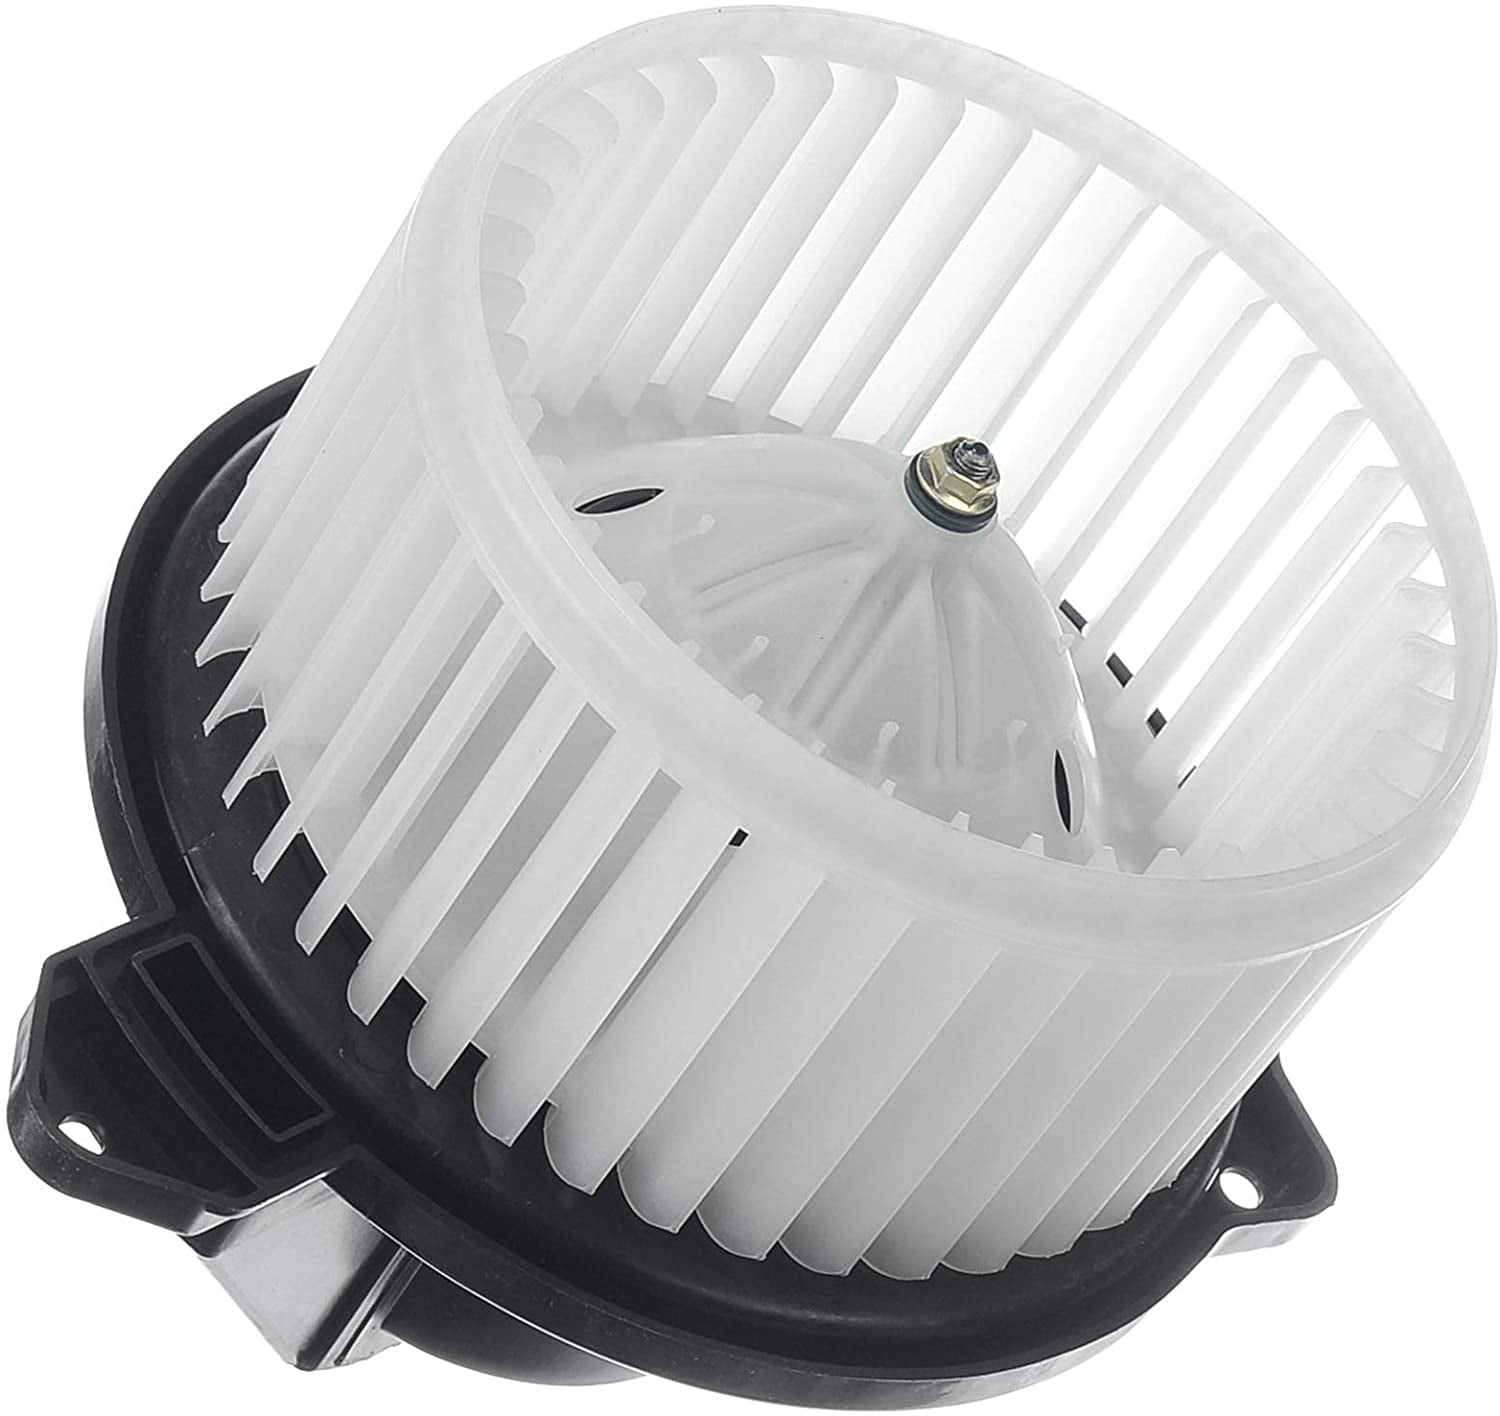 05-08 Ram 4000 Jeep 02-04 Grand Cherokee Replaces 5012701AB Front AC Heater Blower Motor w/Fan Compatible with Dodge 03-08 Ram 1500 2500 3500 Pick Up 